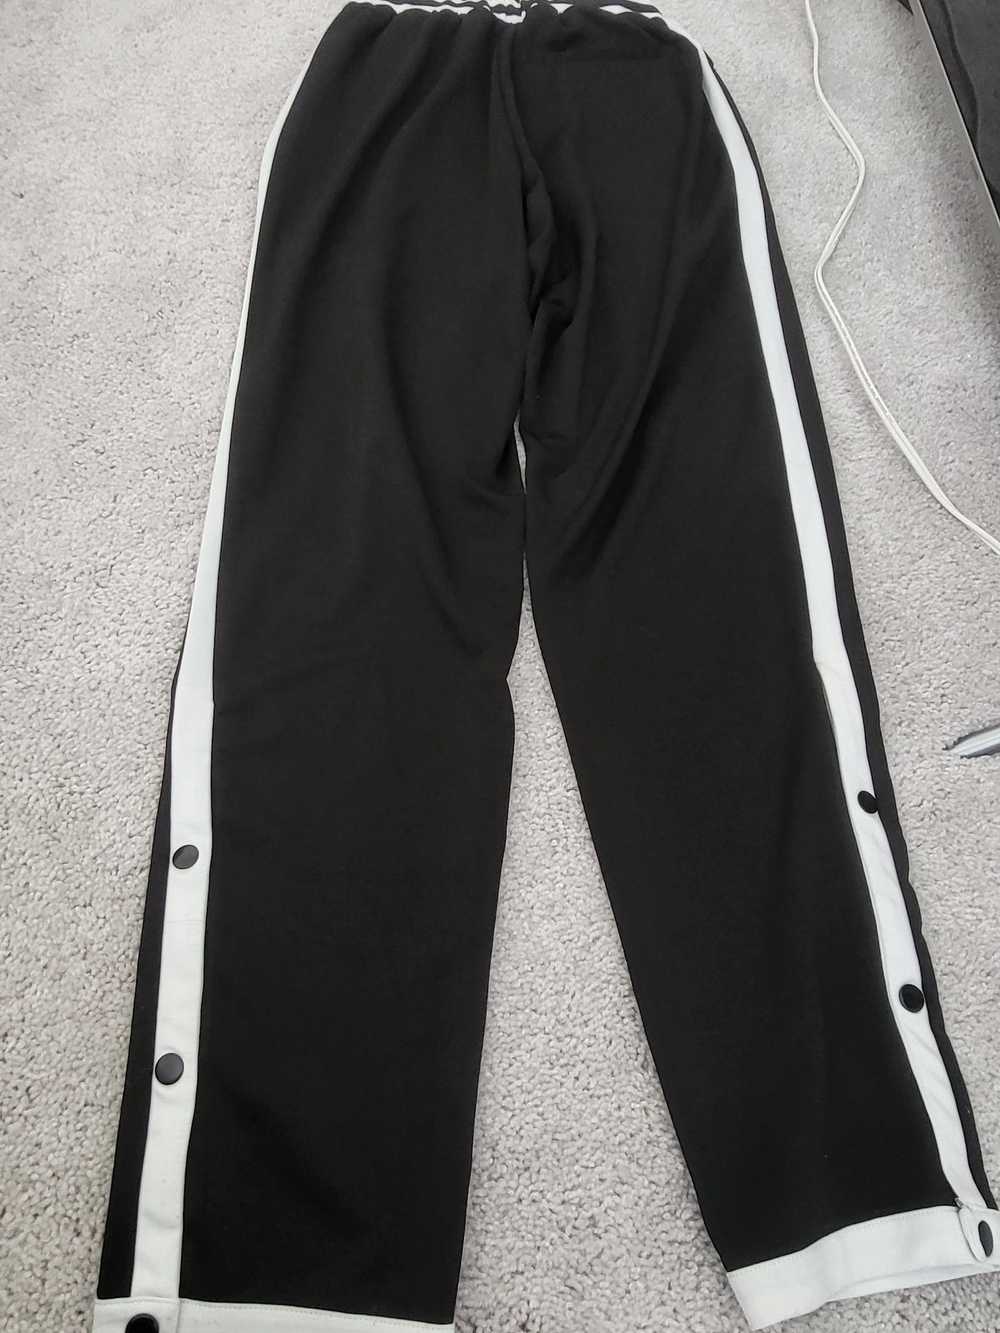 Streetwear Black jogger with stripes (Size S) - image 3